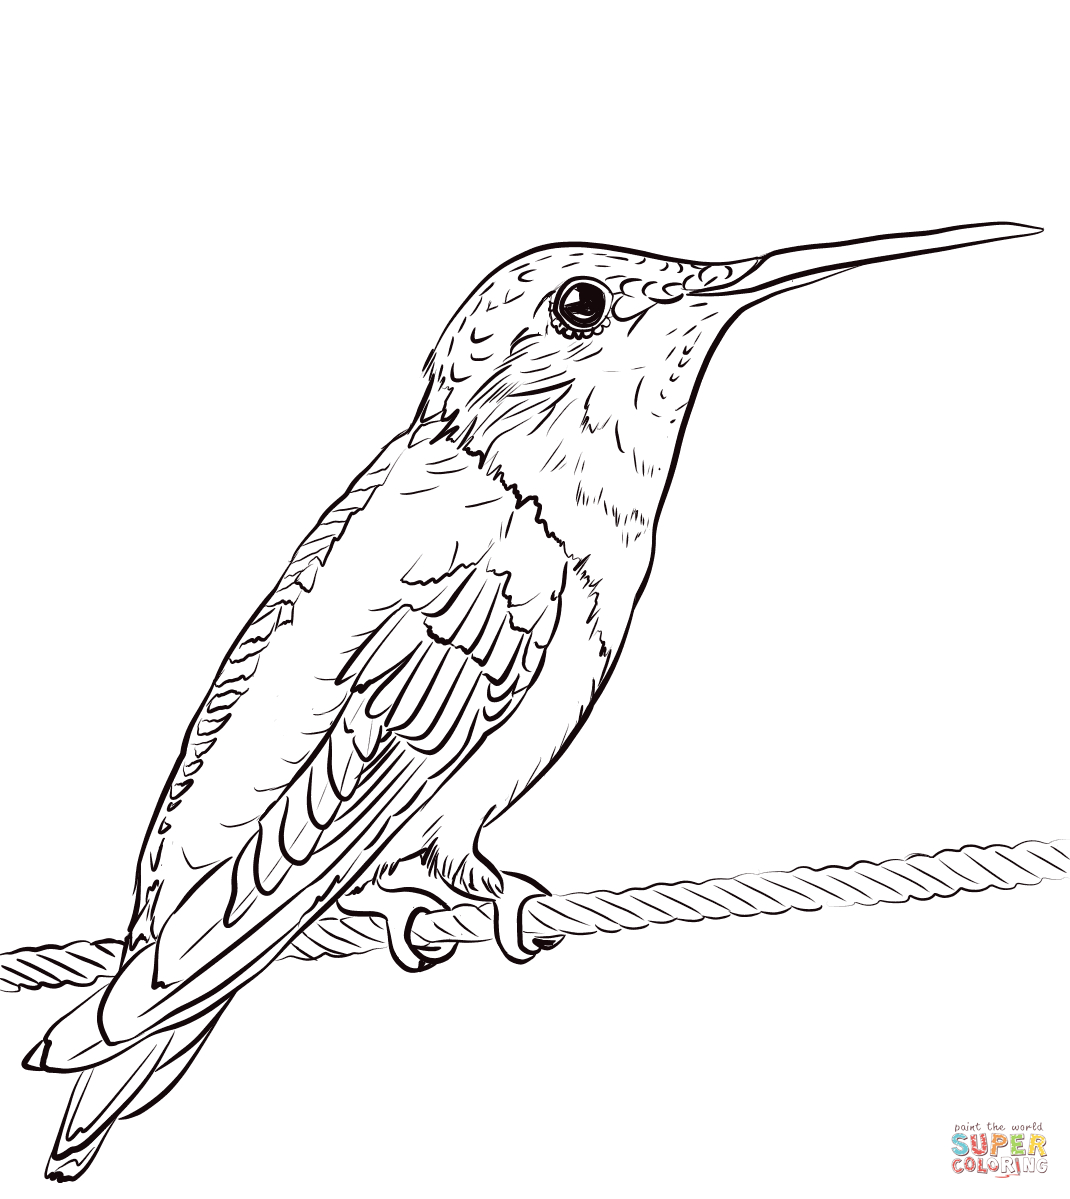 Ruby-Throated Hummingbird Coloring Page | Free Printable Coloring Pages - Free Printable Pictures Of Hummingbirds